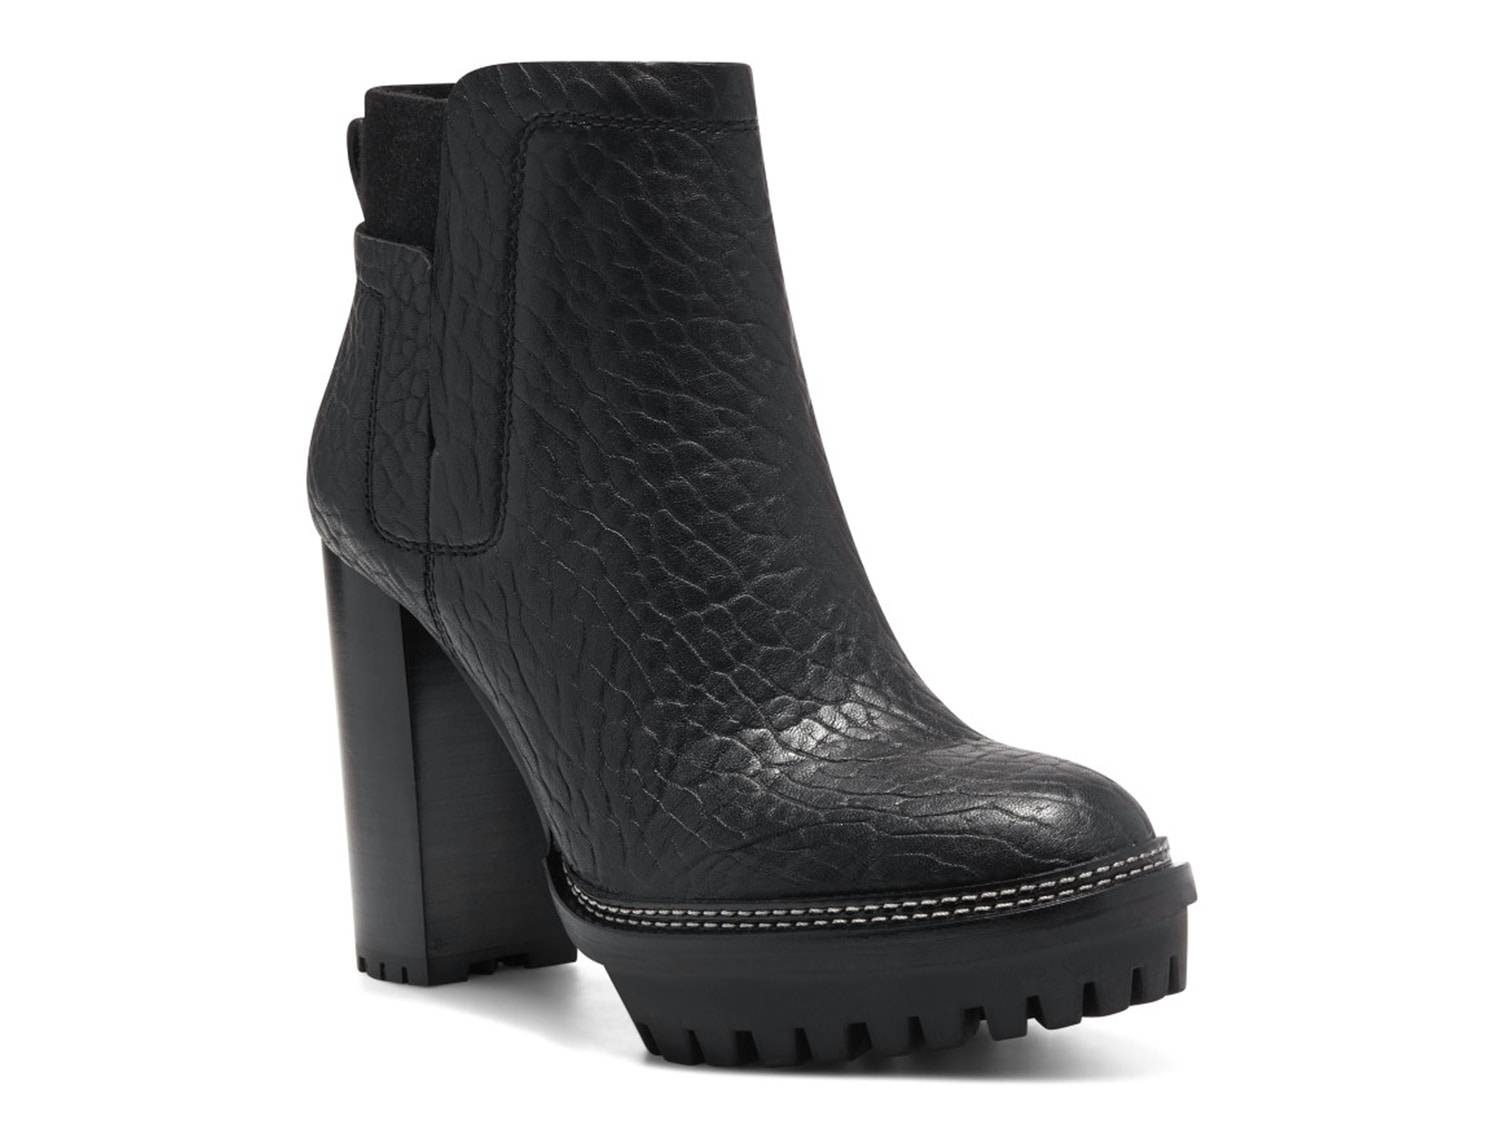 Vince Camuto Erinia Platform Bootie - Free Shipping | DSW